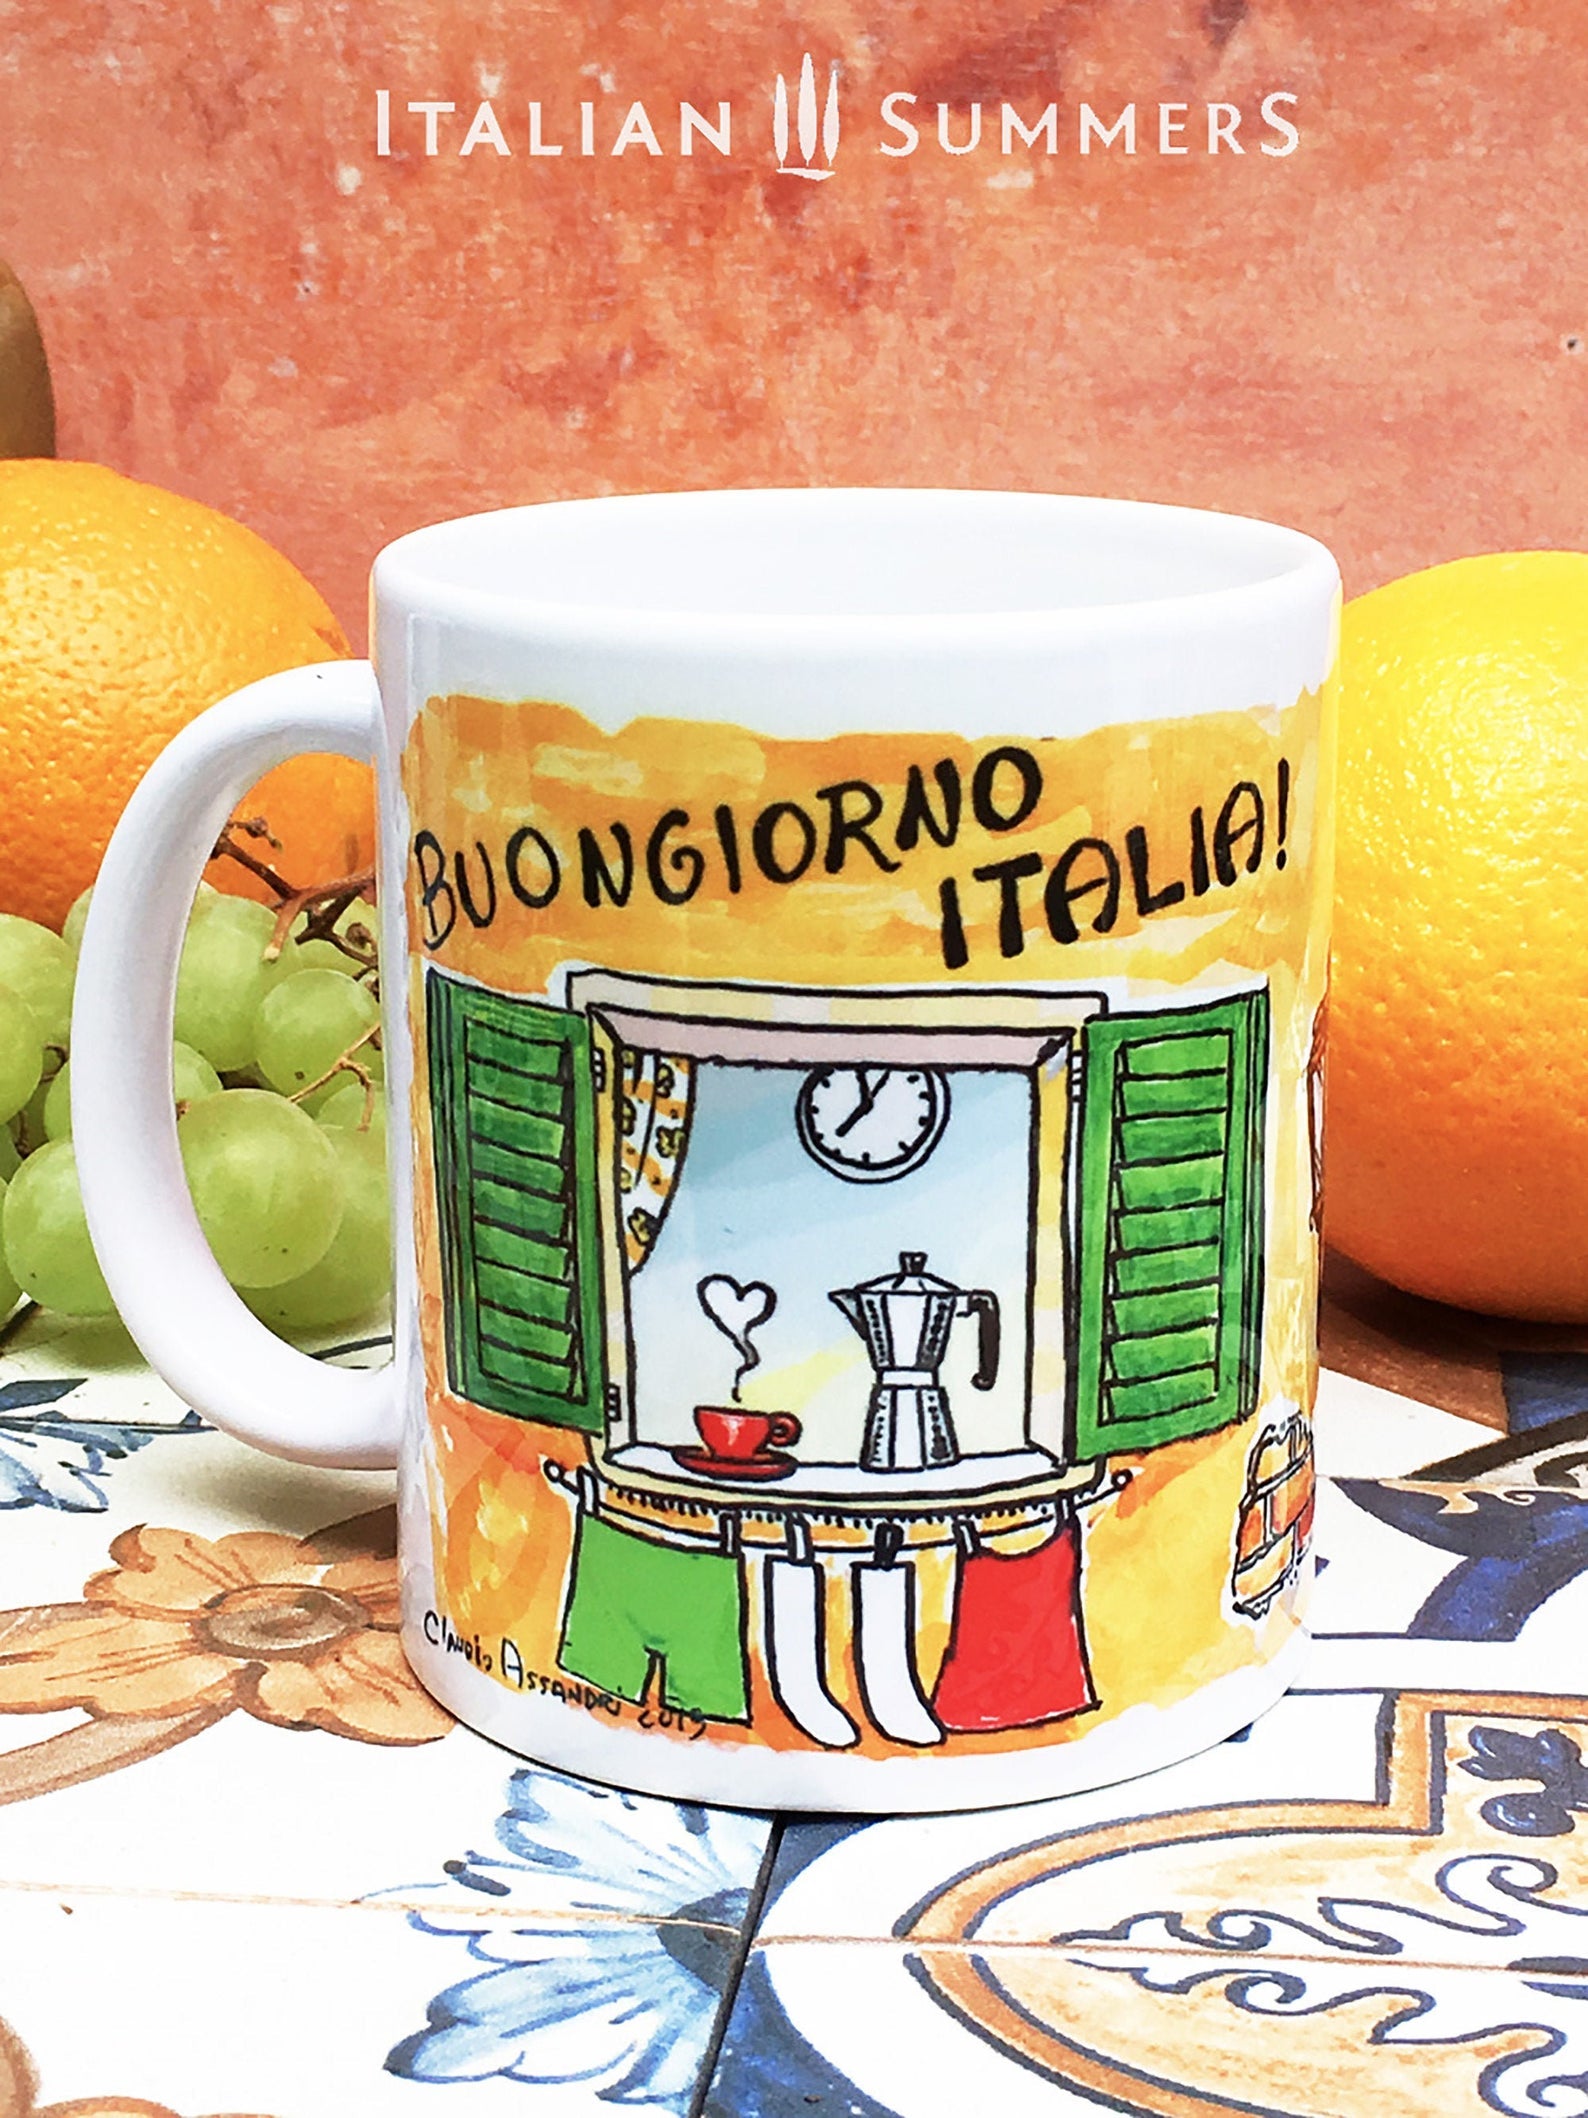 Italy inspired mug by sketches of an open Italian window. The window has green shutter, on the lower part of the windows hangs laundry in the color of the Italian flag. In the window sill ther is a red coffee mug and an Italian coffee poet, la moka. The Italian window is surrounded by a terracotta wall. Above the window there is written 'Buongiorno Italia' in black handwriting. Made by Italian Summers 